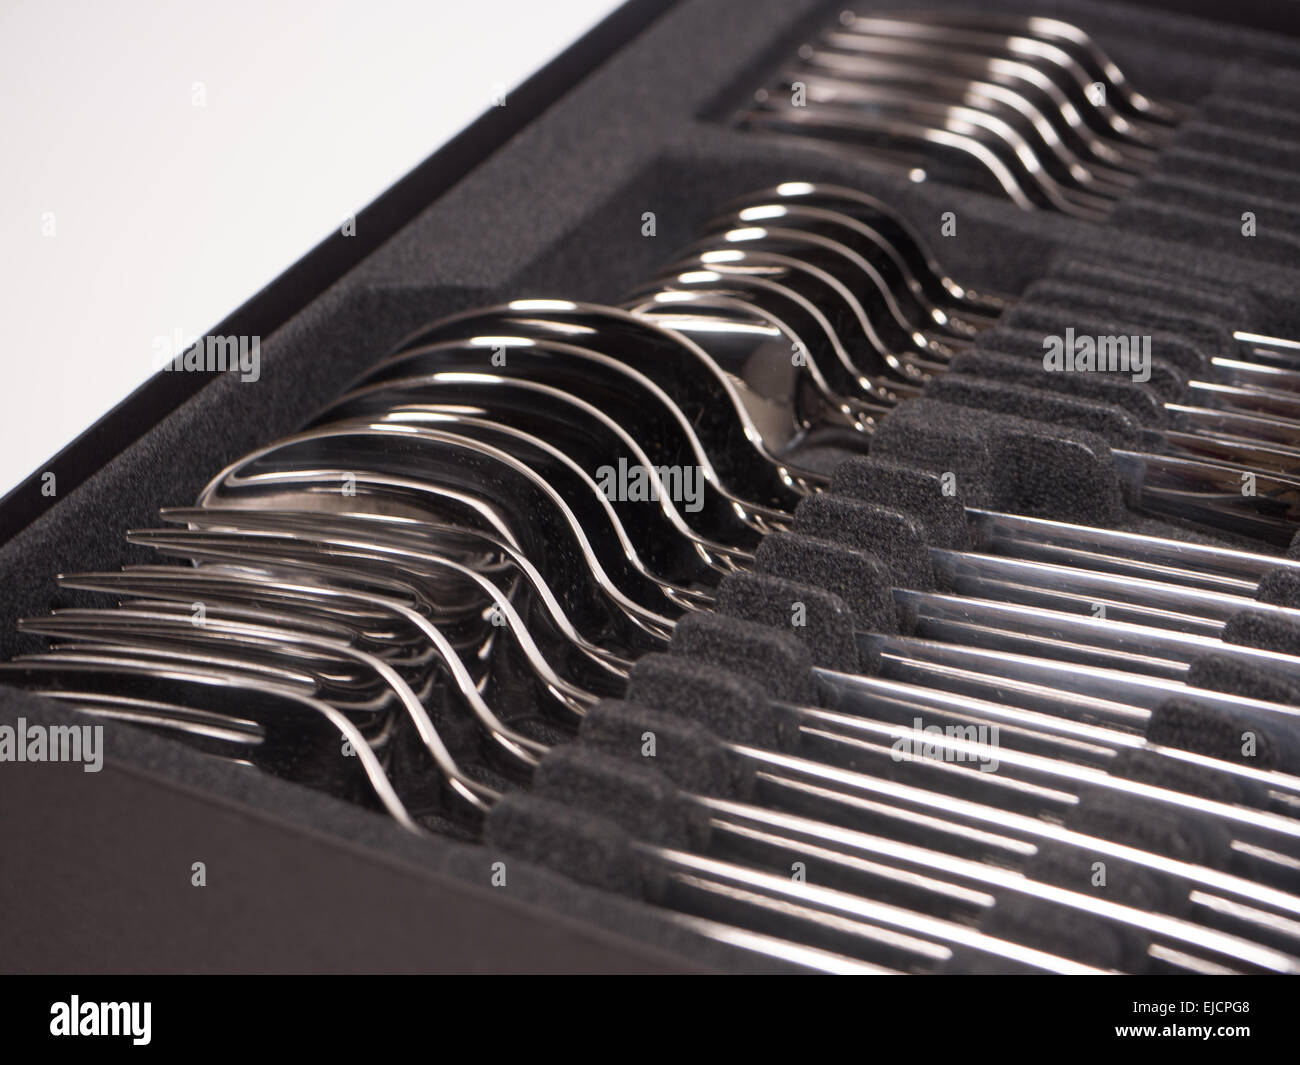 Cutlery Tray with new cutlery Stock Photo